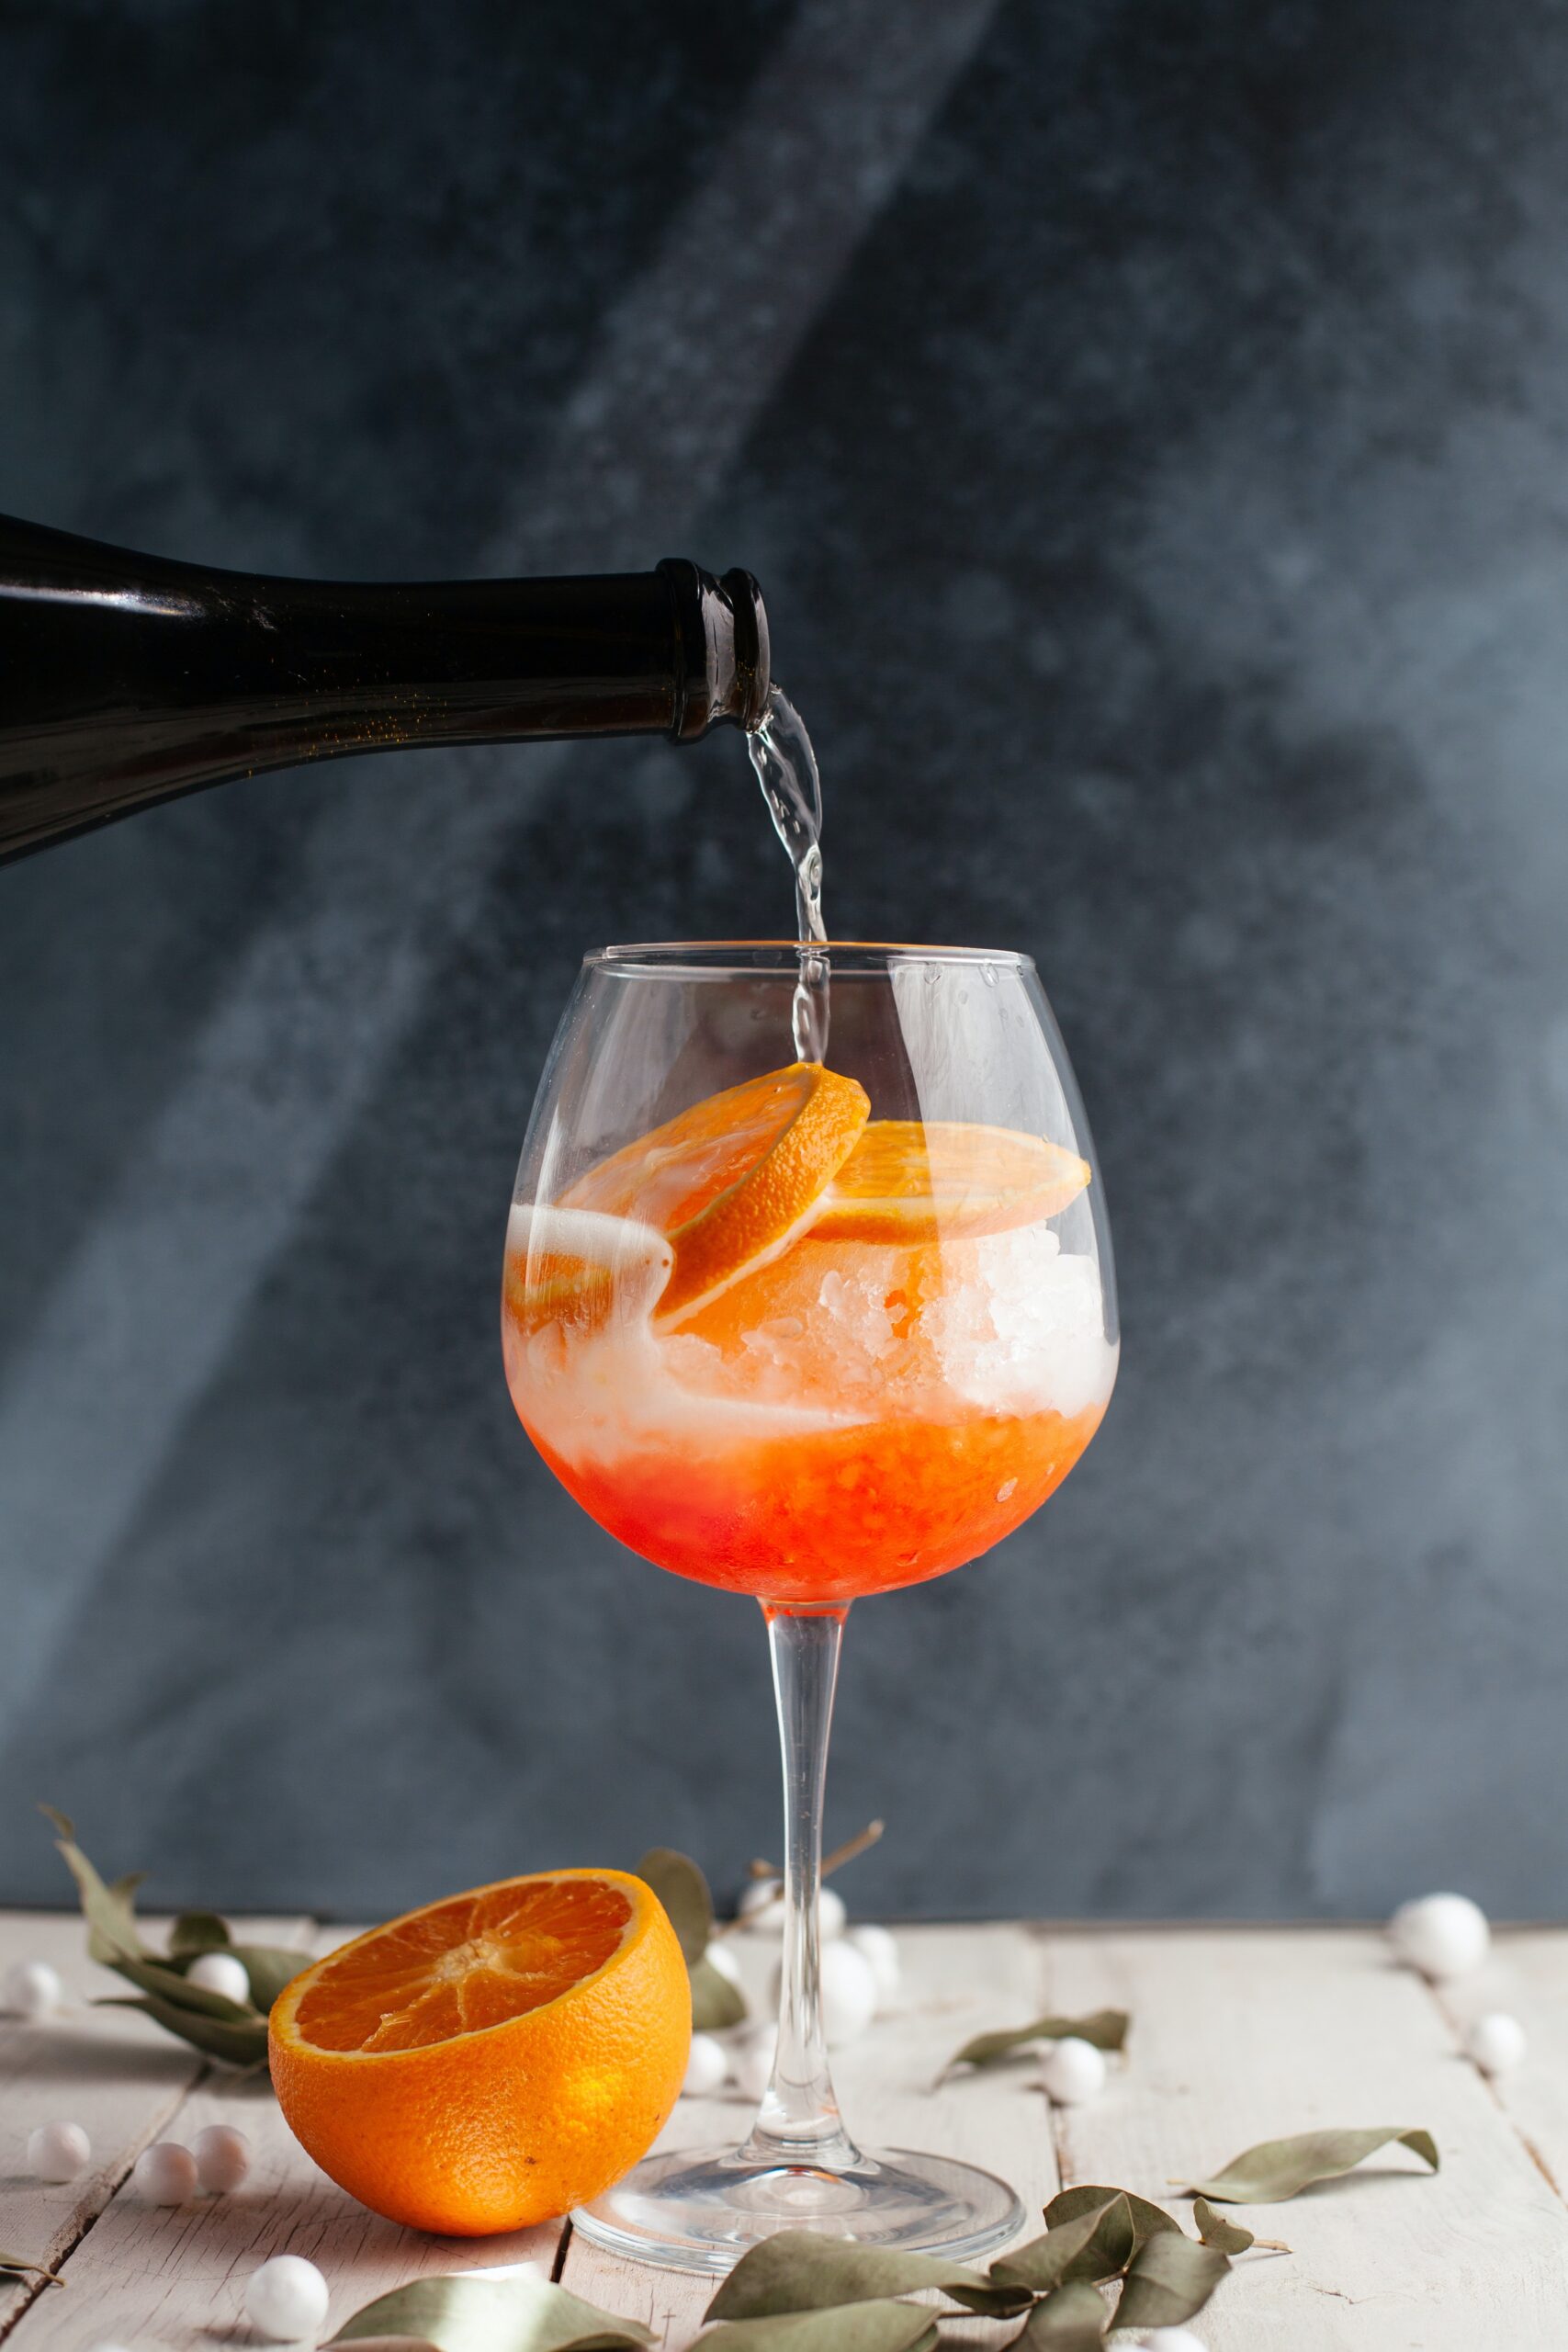 Add A Little “Dolce Vita” To Your Dinner – Try Tribe’s CBD Aperol Spritz Recipe